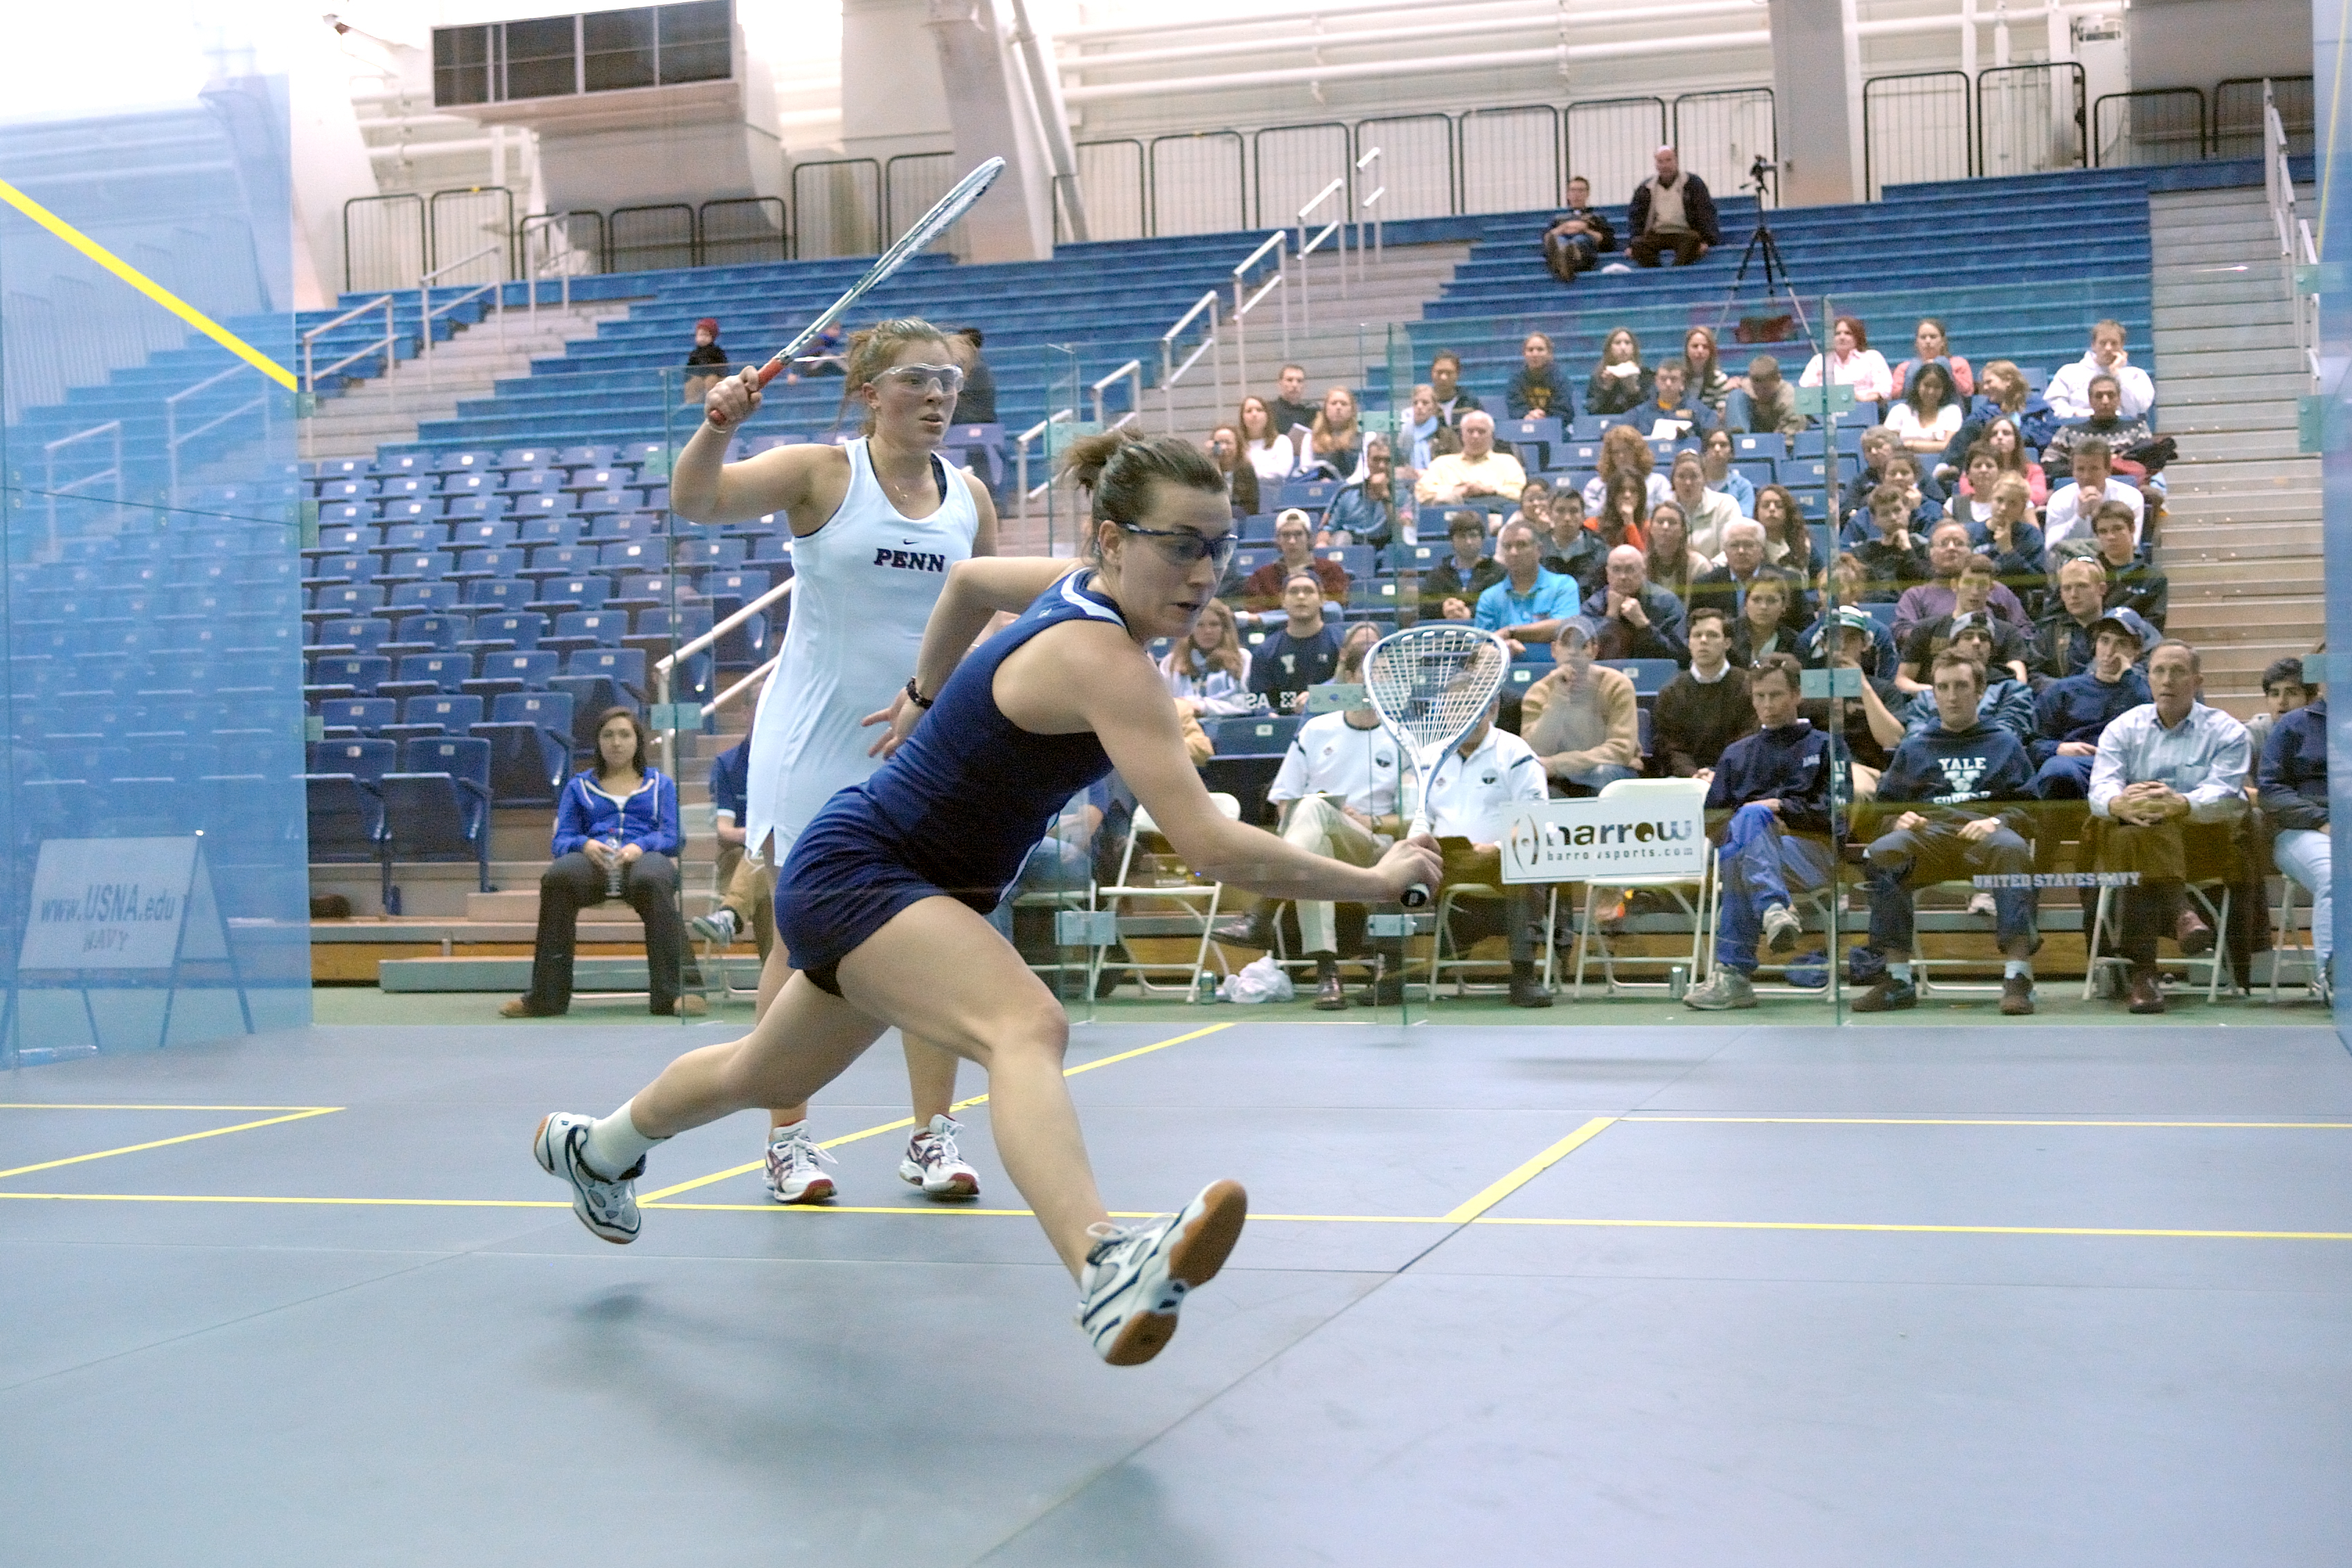 Yale's Miranda Ranieri (R) lived up to her No. 1 seeding by winning the Ramsay Cup at the Women's Singles Championships. In the final she stopped the No. 2 seed, Penn's Kristen Lange, in four games. 